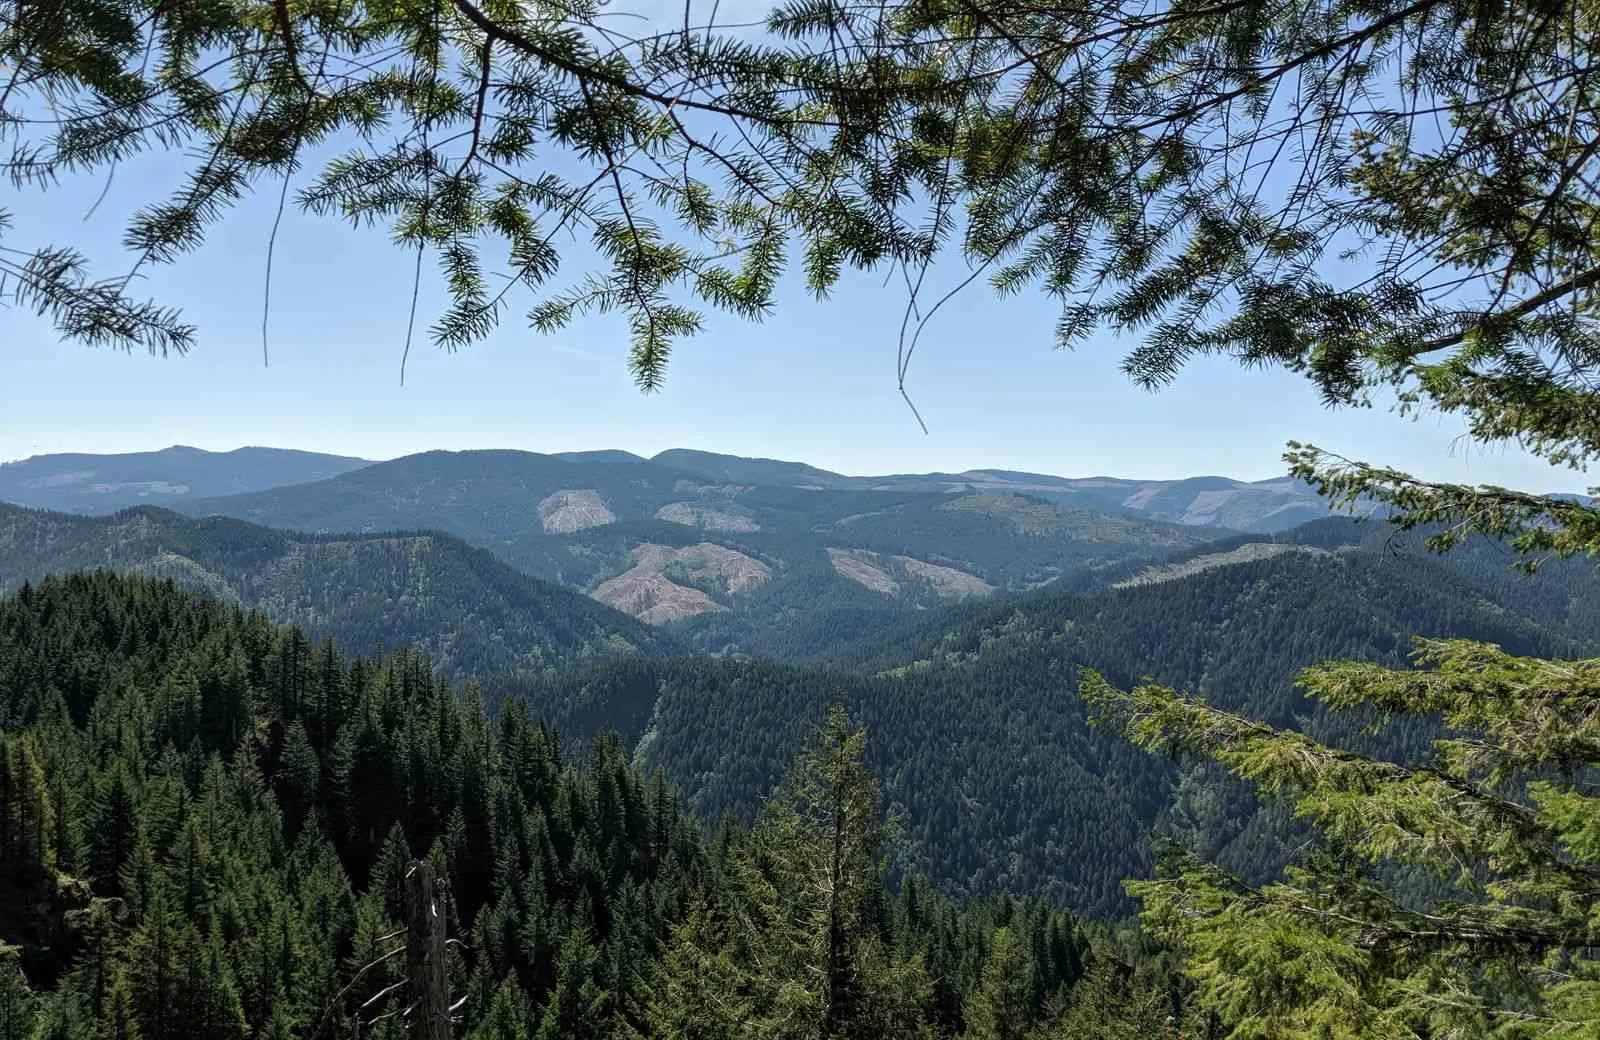 Elk Mountain will be the toughest Tillamook hike that you do, but the views are worth it.